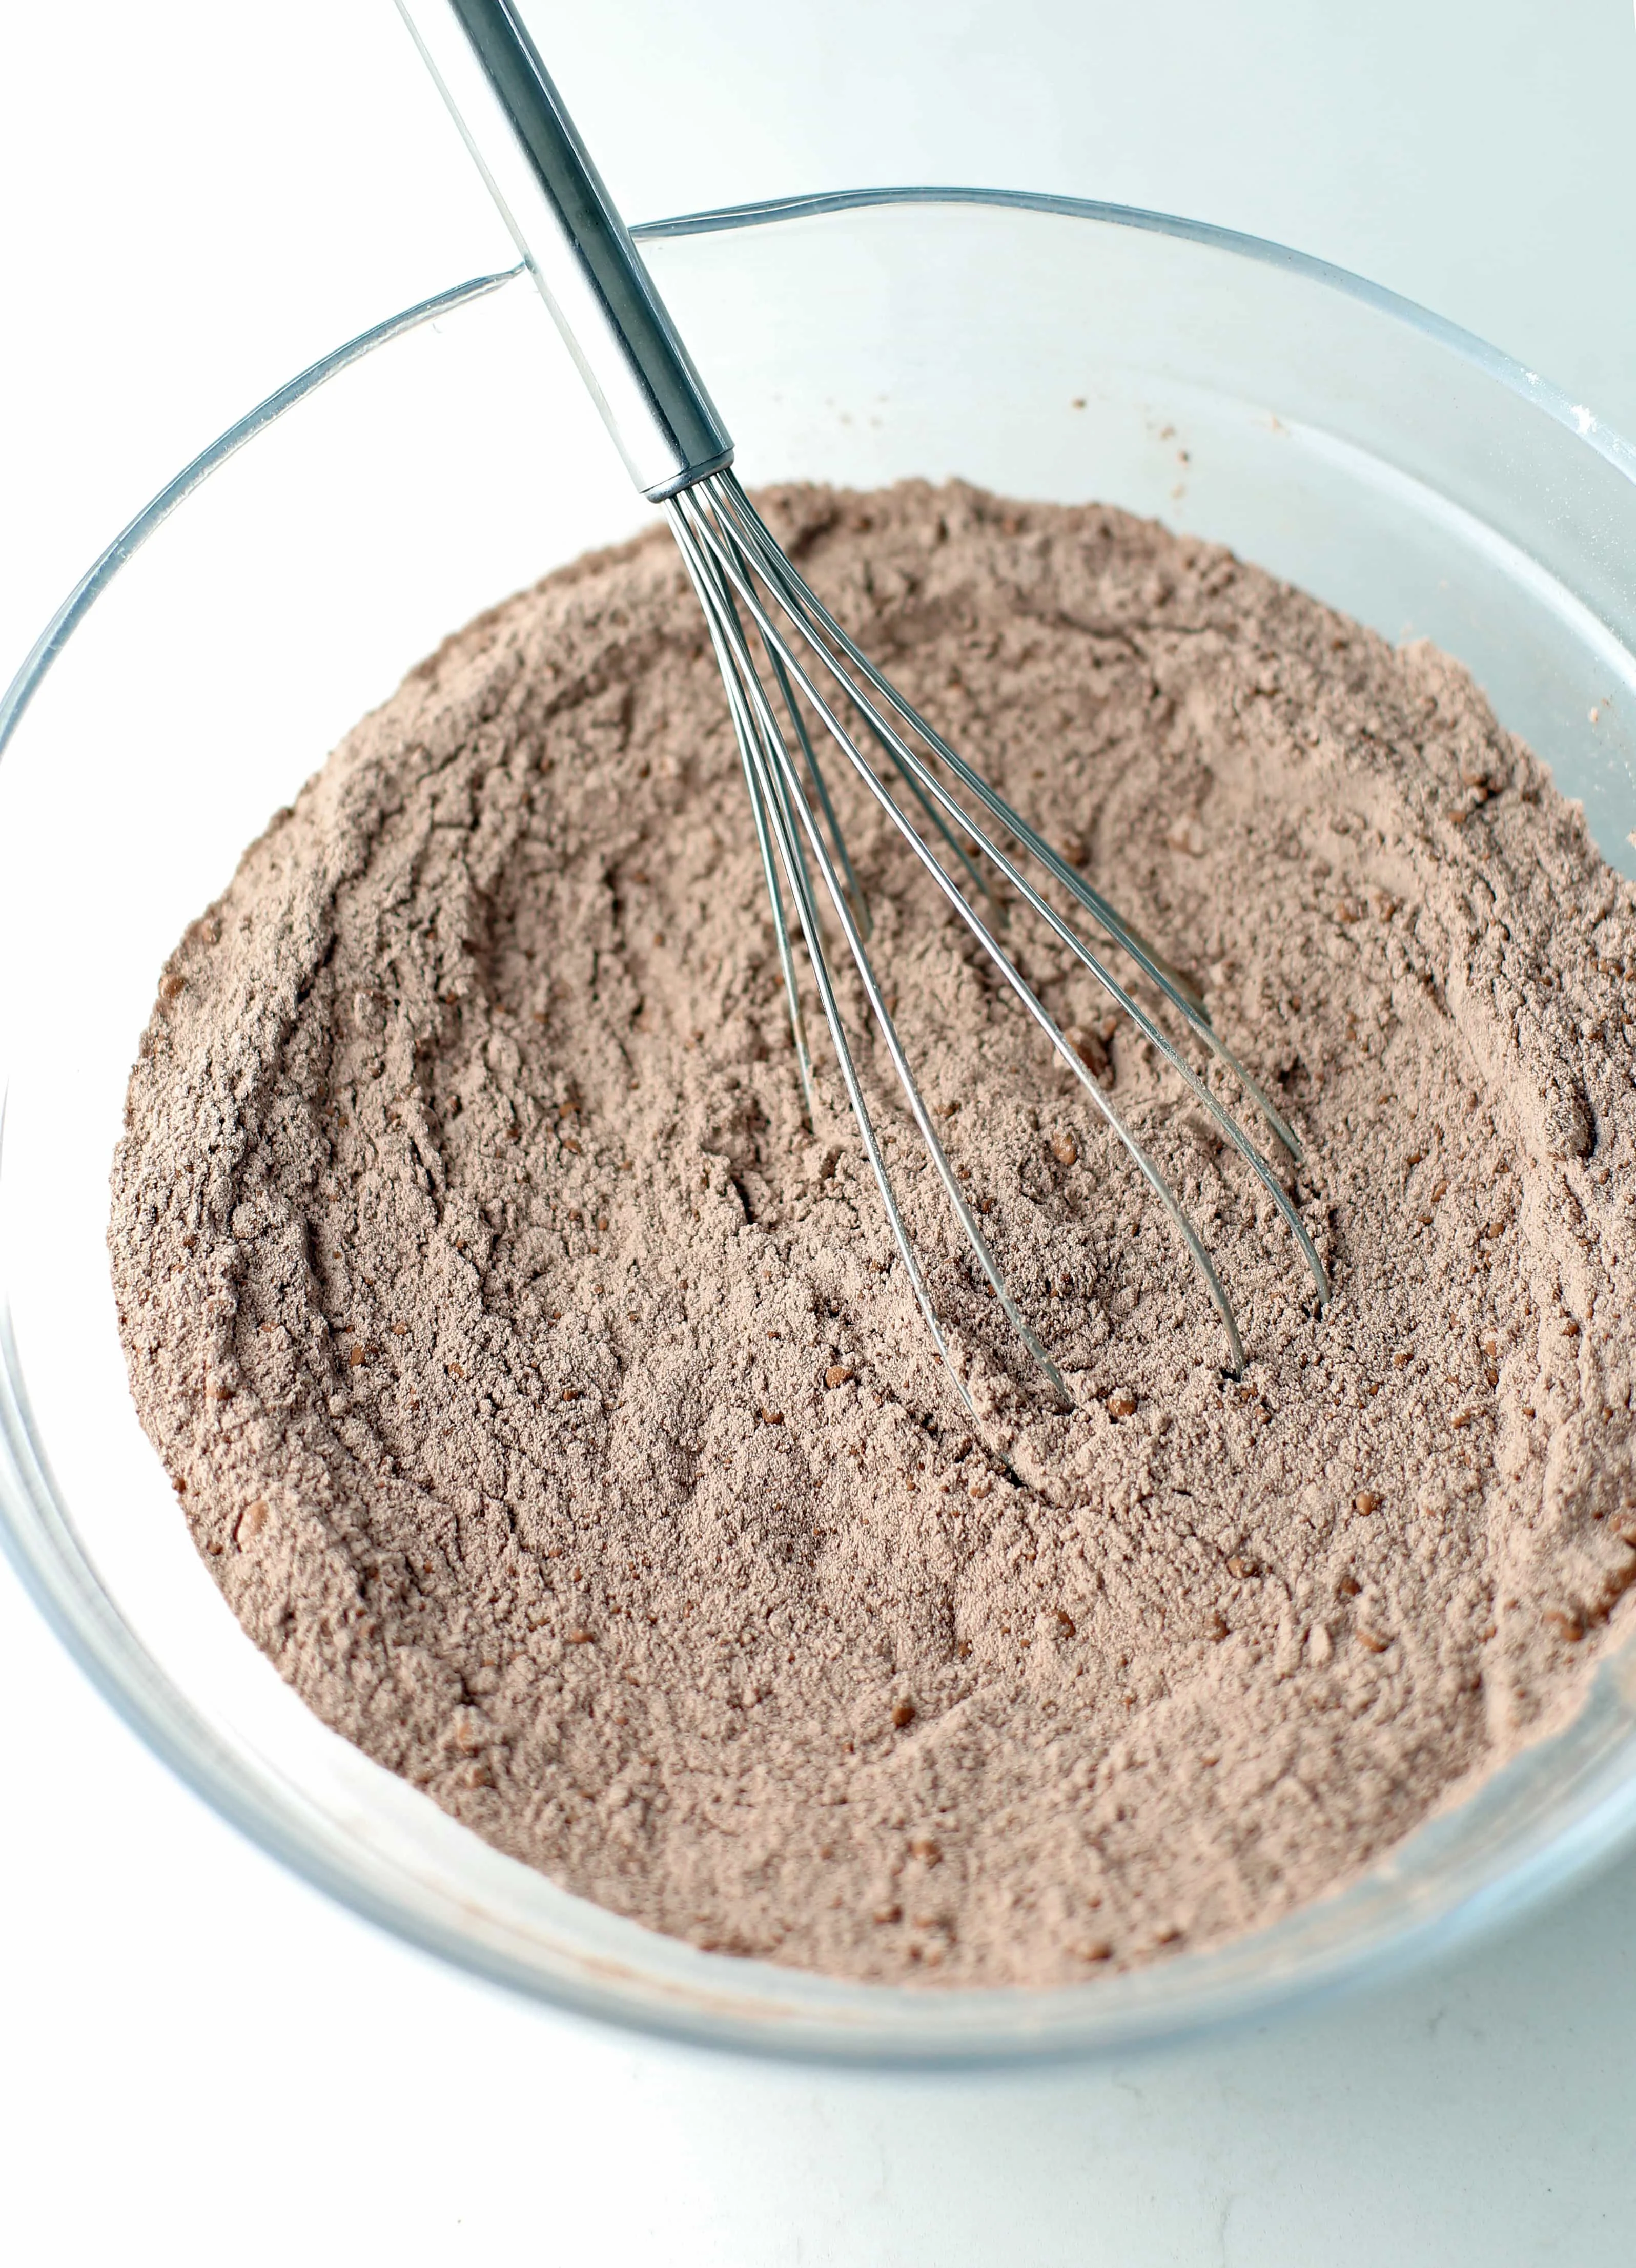 Dry baking ingredients including cocoa power and all-purpose flour mixed in a glass bowl.